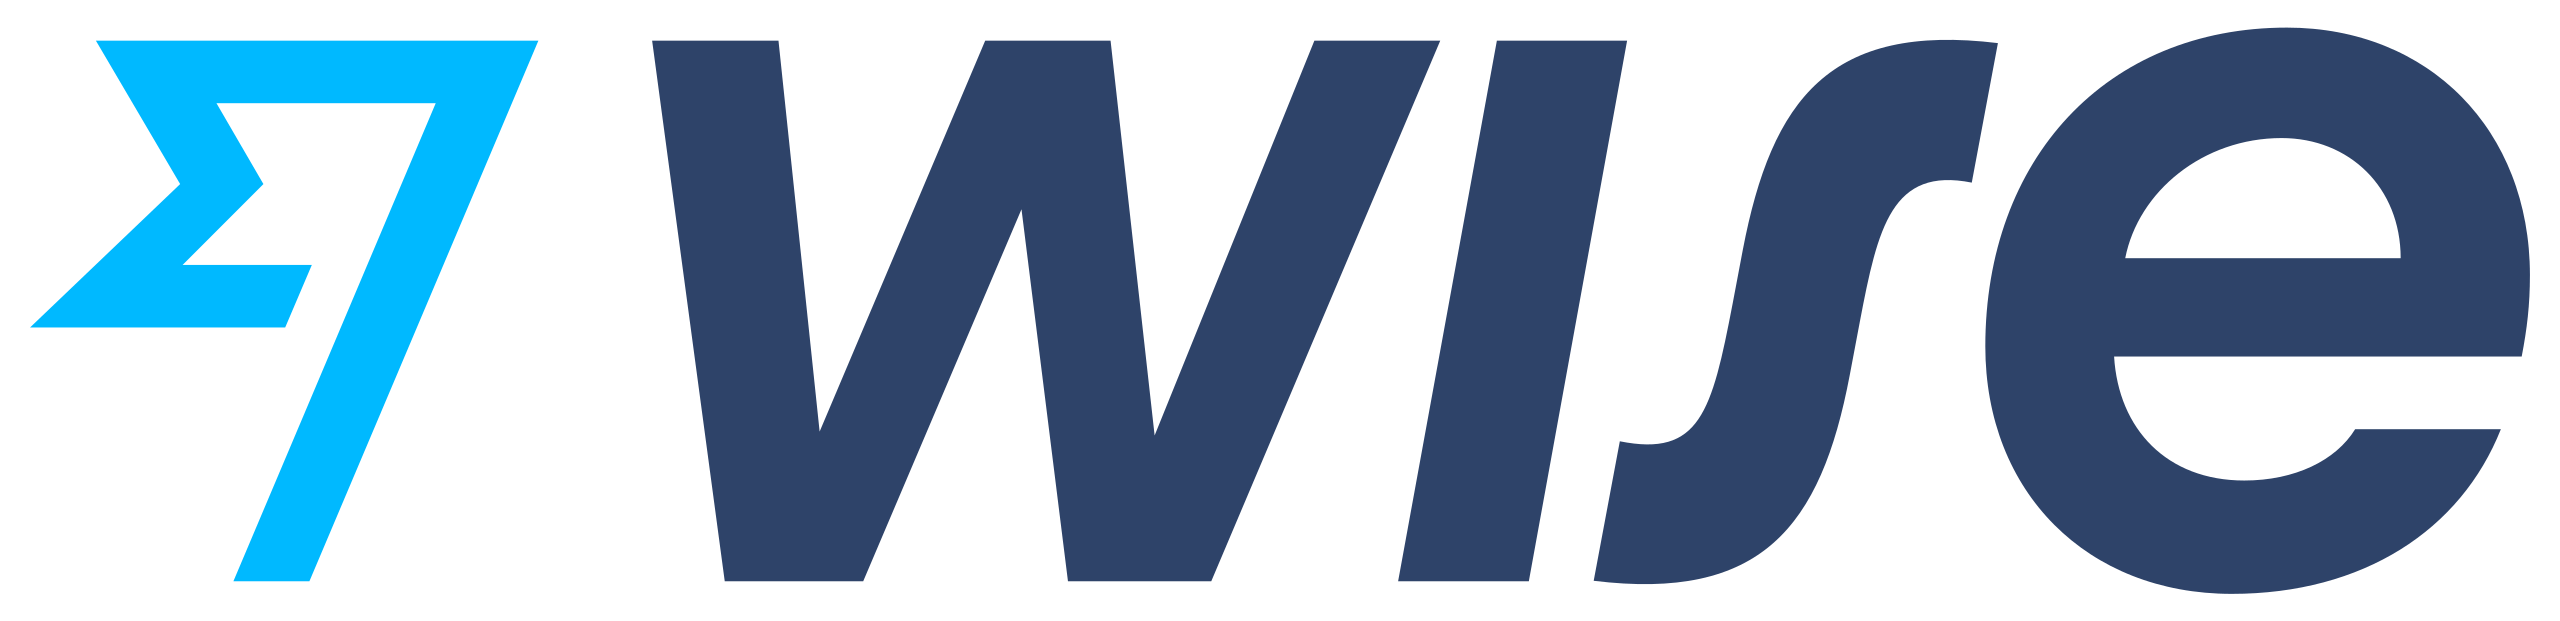 New Wise formerly TransferWise logo.svg Best Software Reseller | Best Software Providers in India